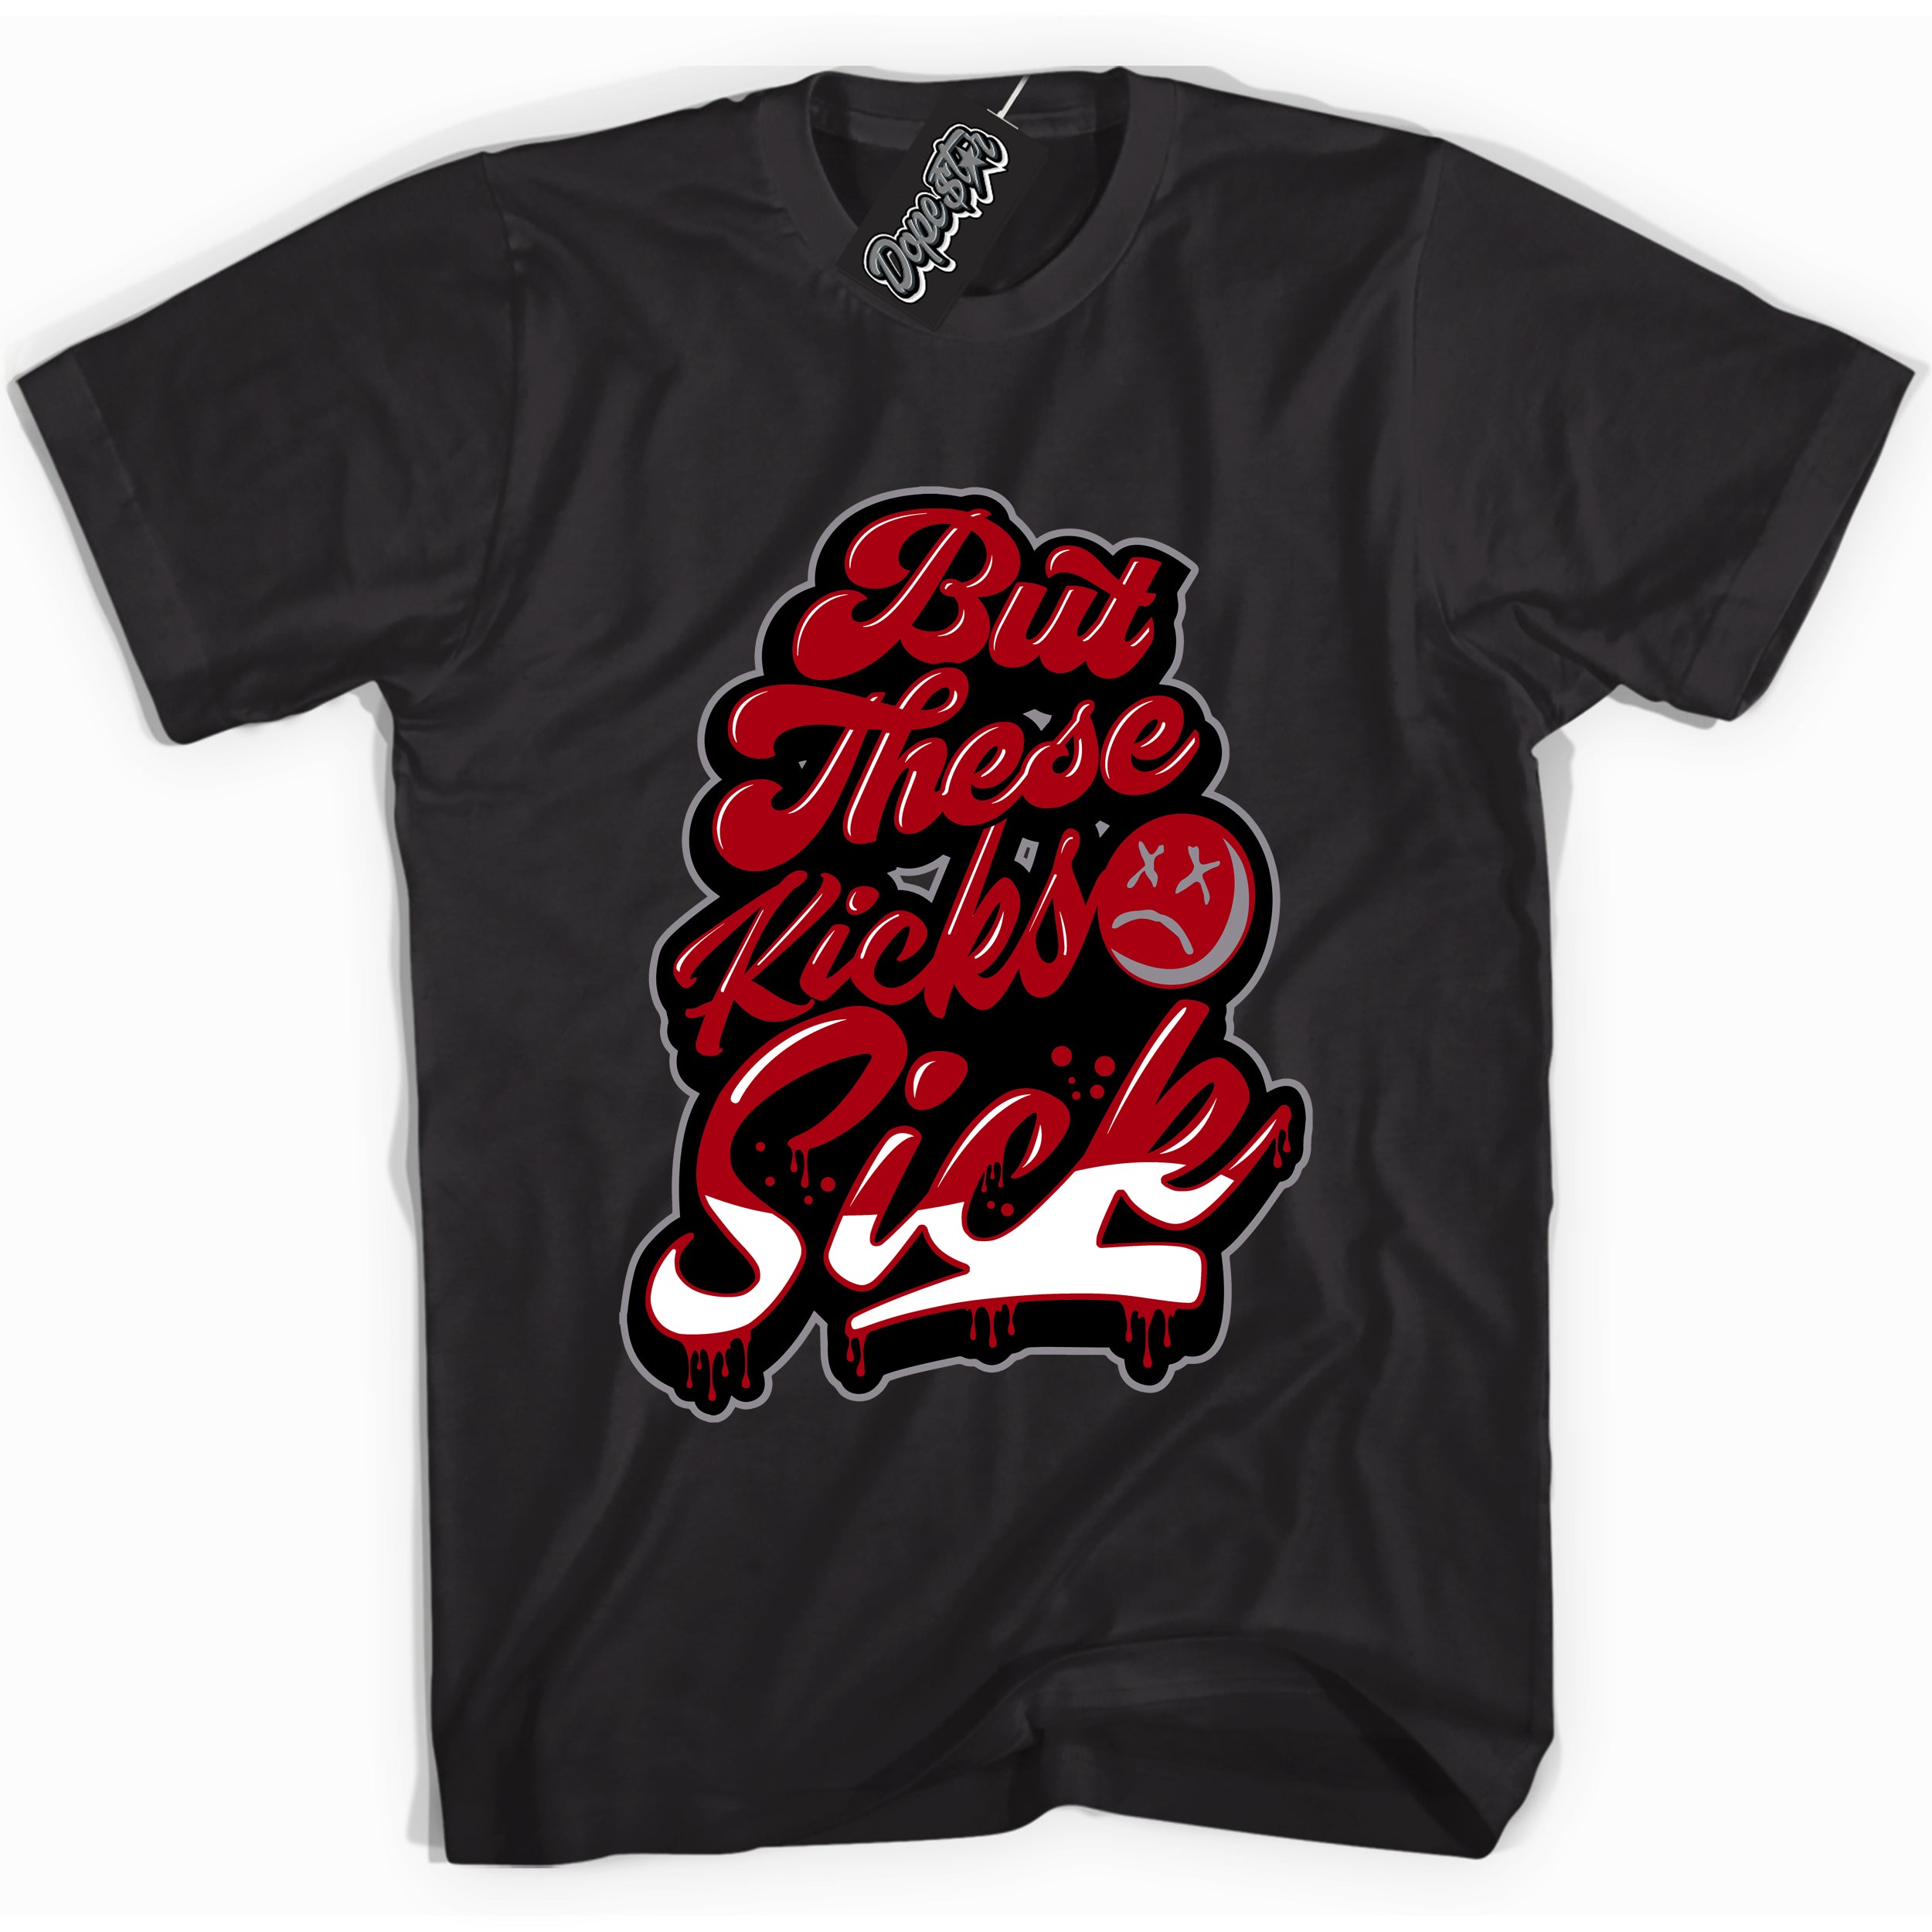 Cool Black Shirt with “ Kick Sick” design that perfectly matches Bred Reimagined 4s Jordans.